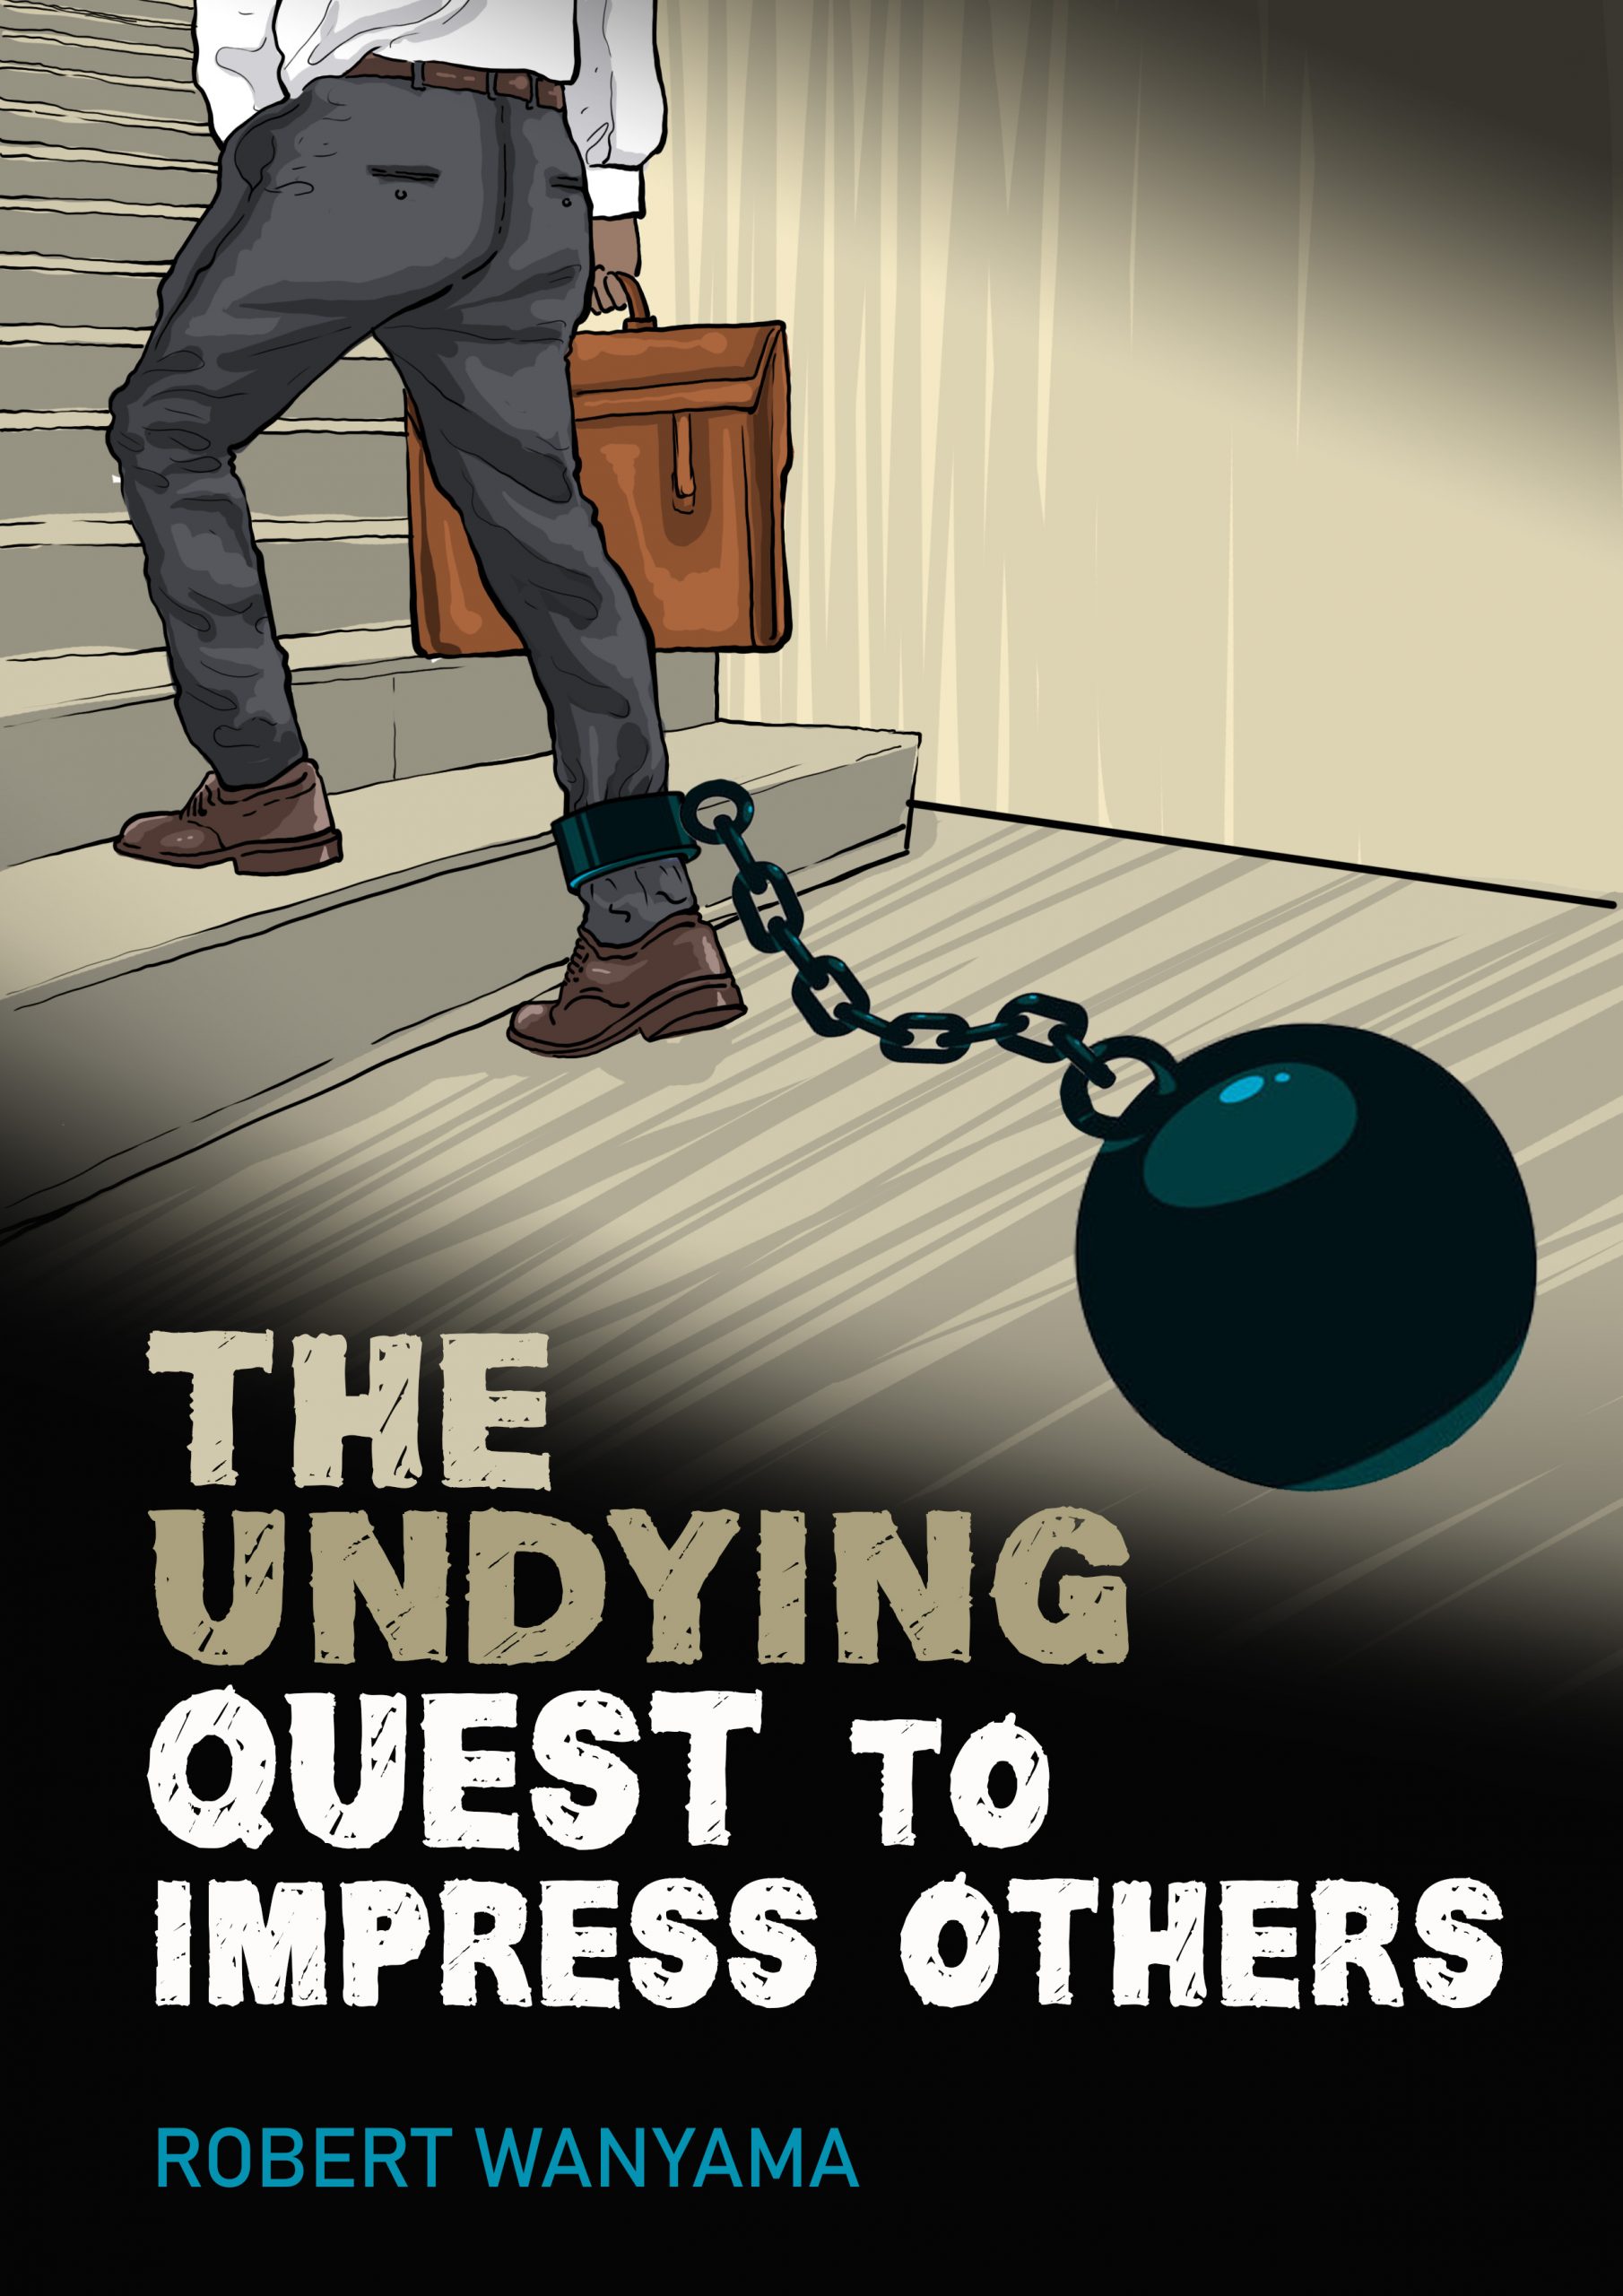 The Undying Quest to Impress Others